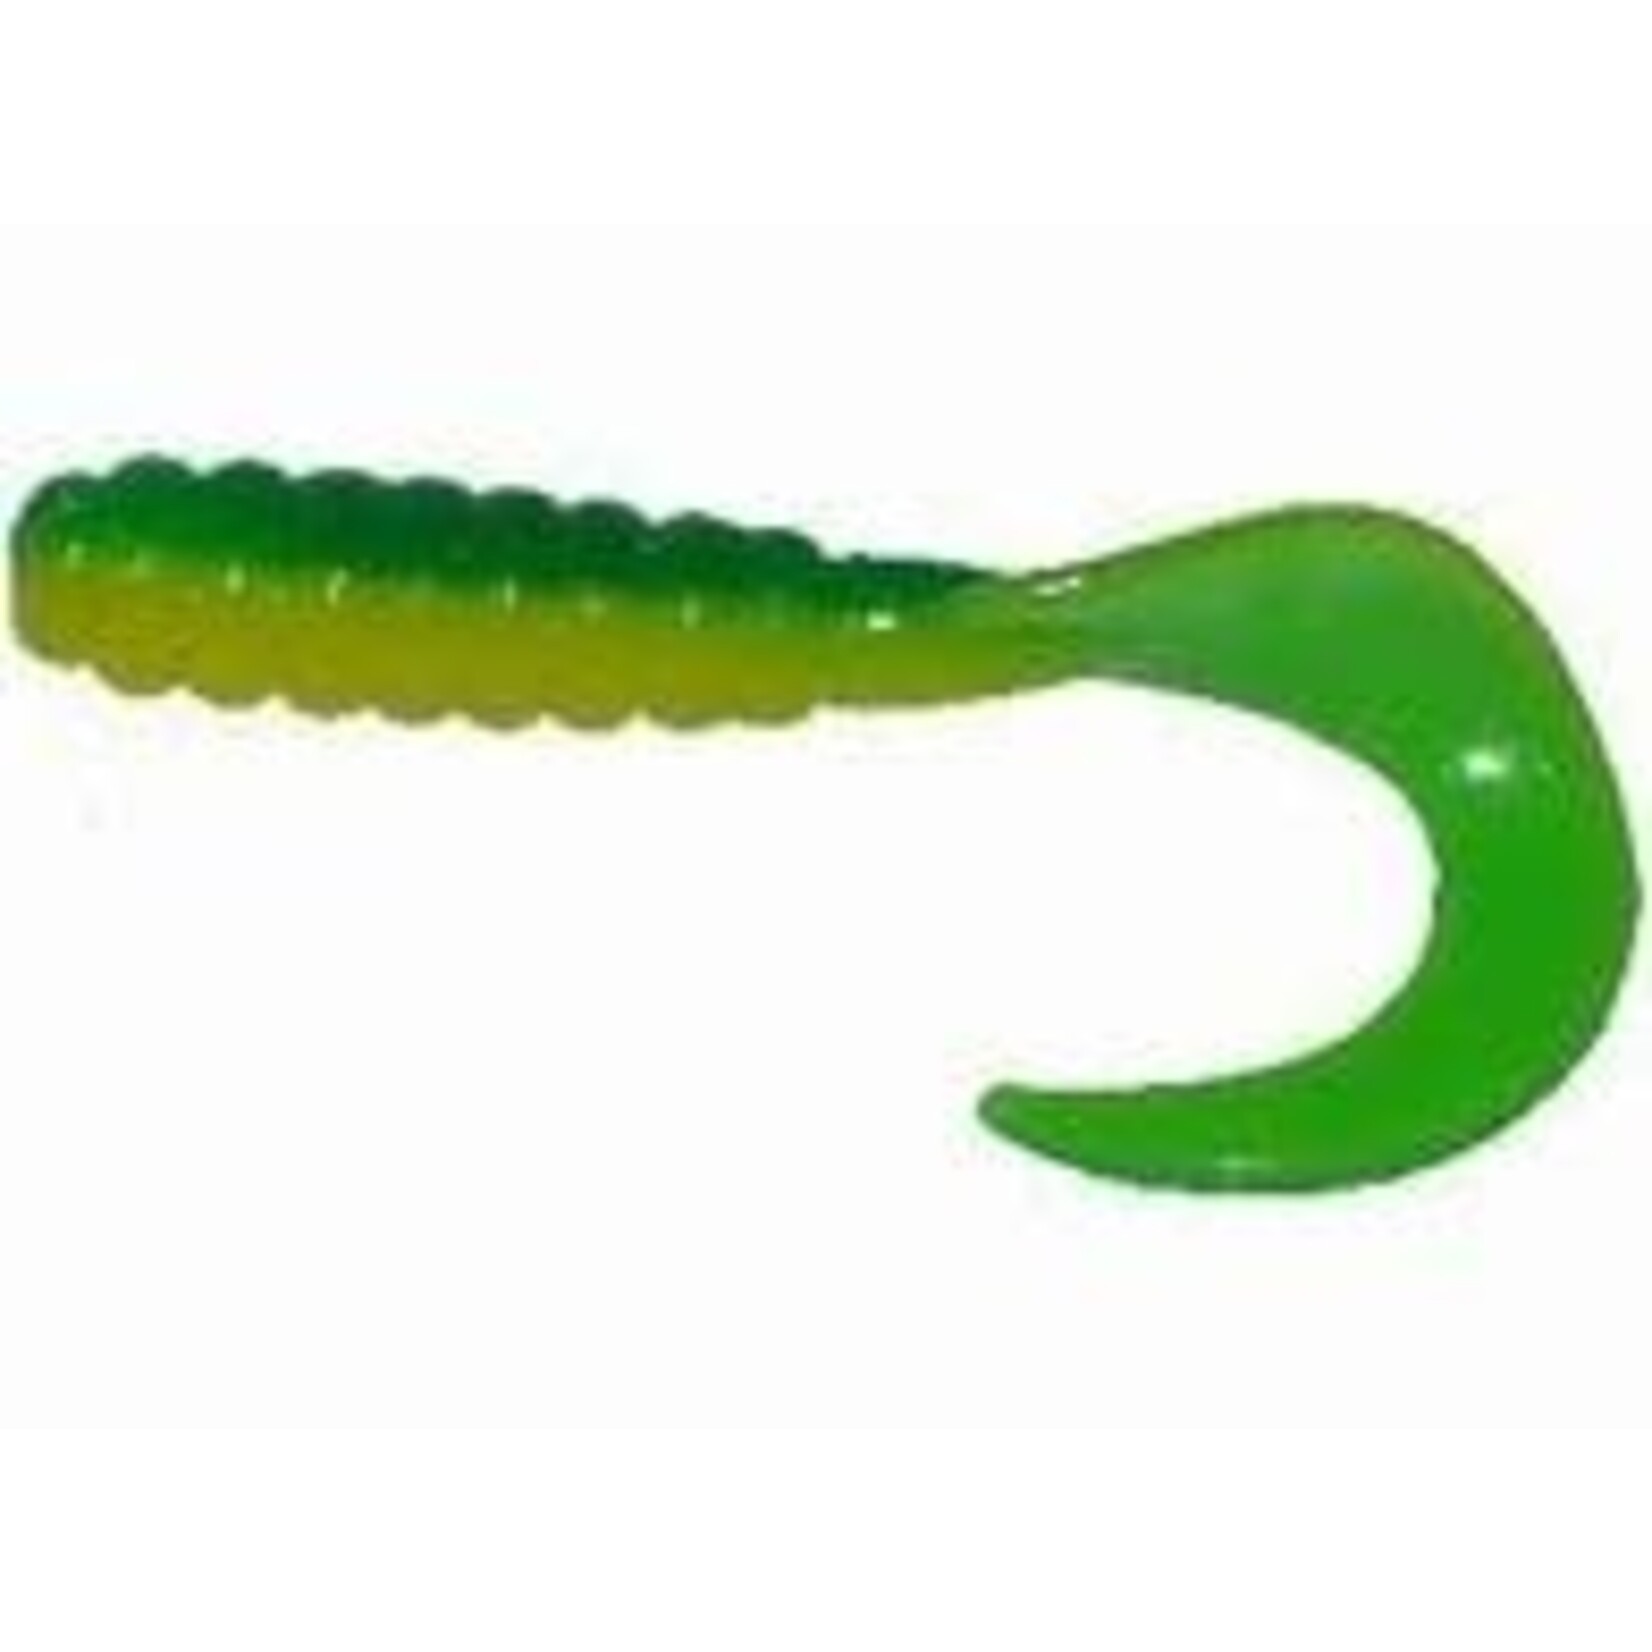 Big Bite Baits 3 Curl Tail Grubs Assorted Colors - Backcountry